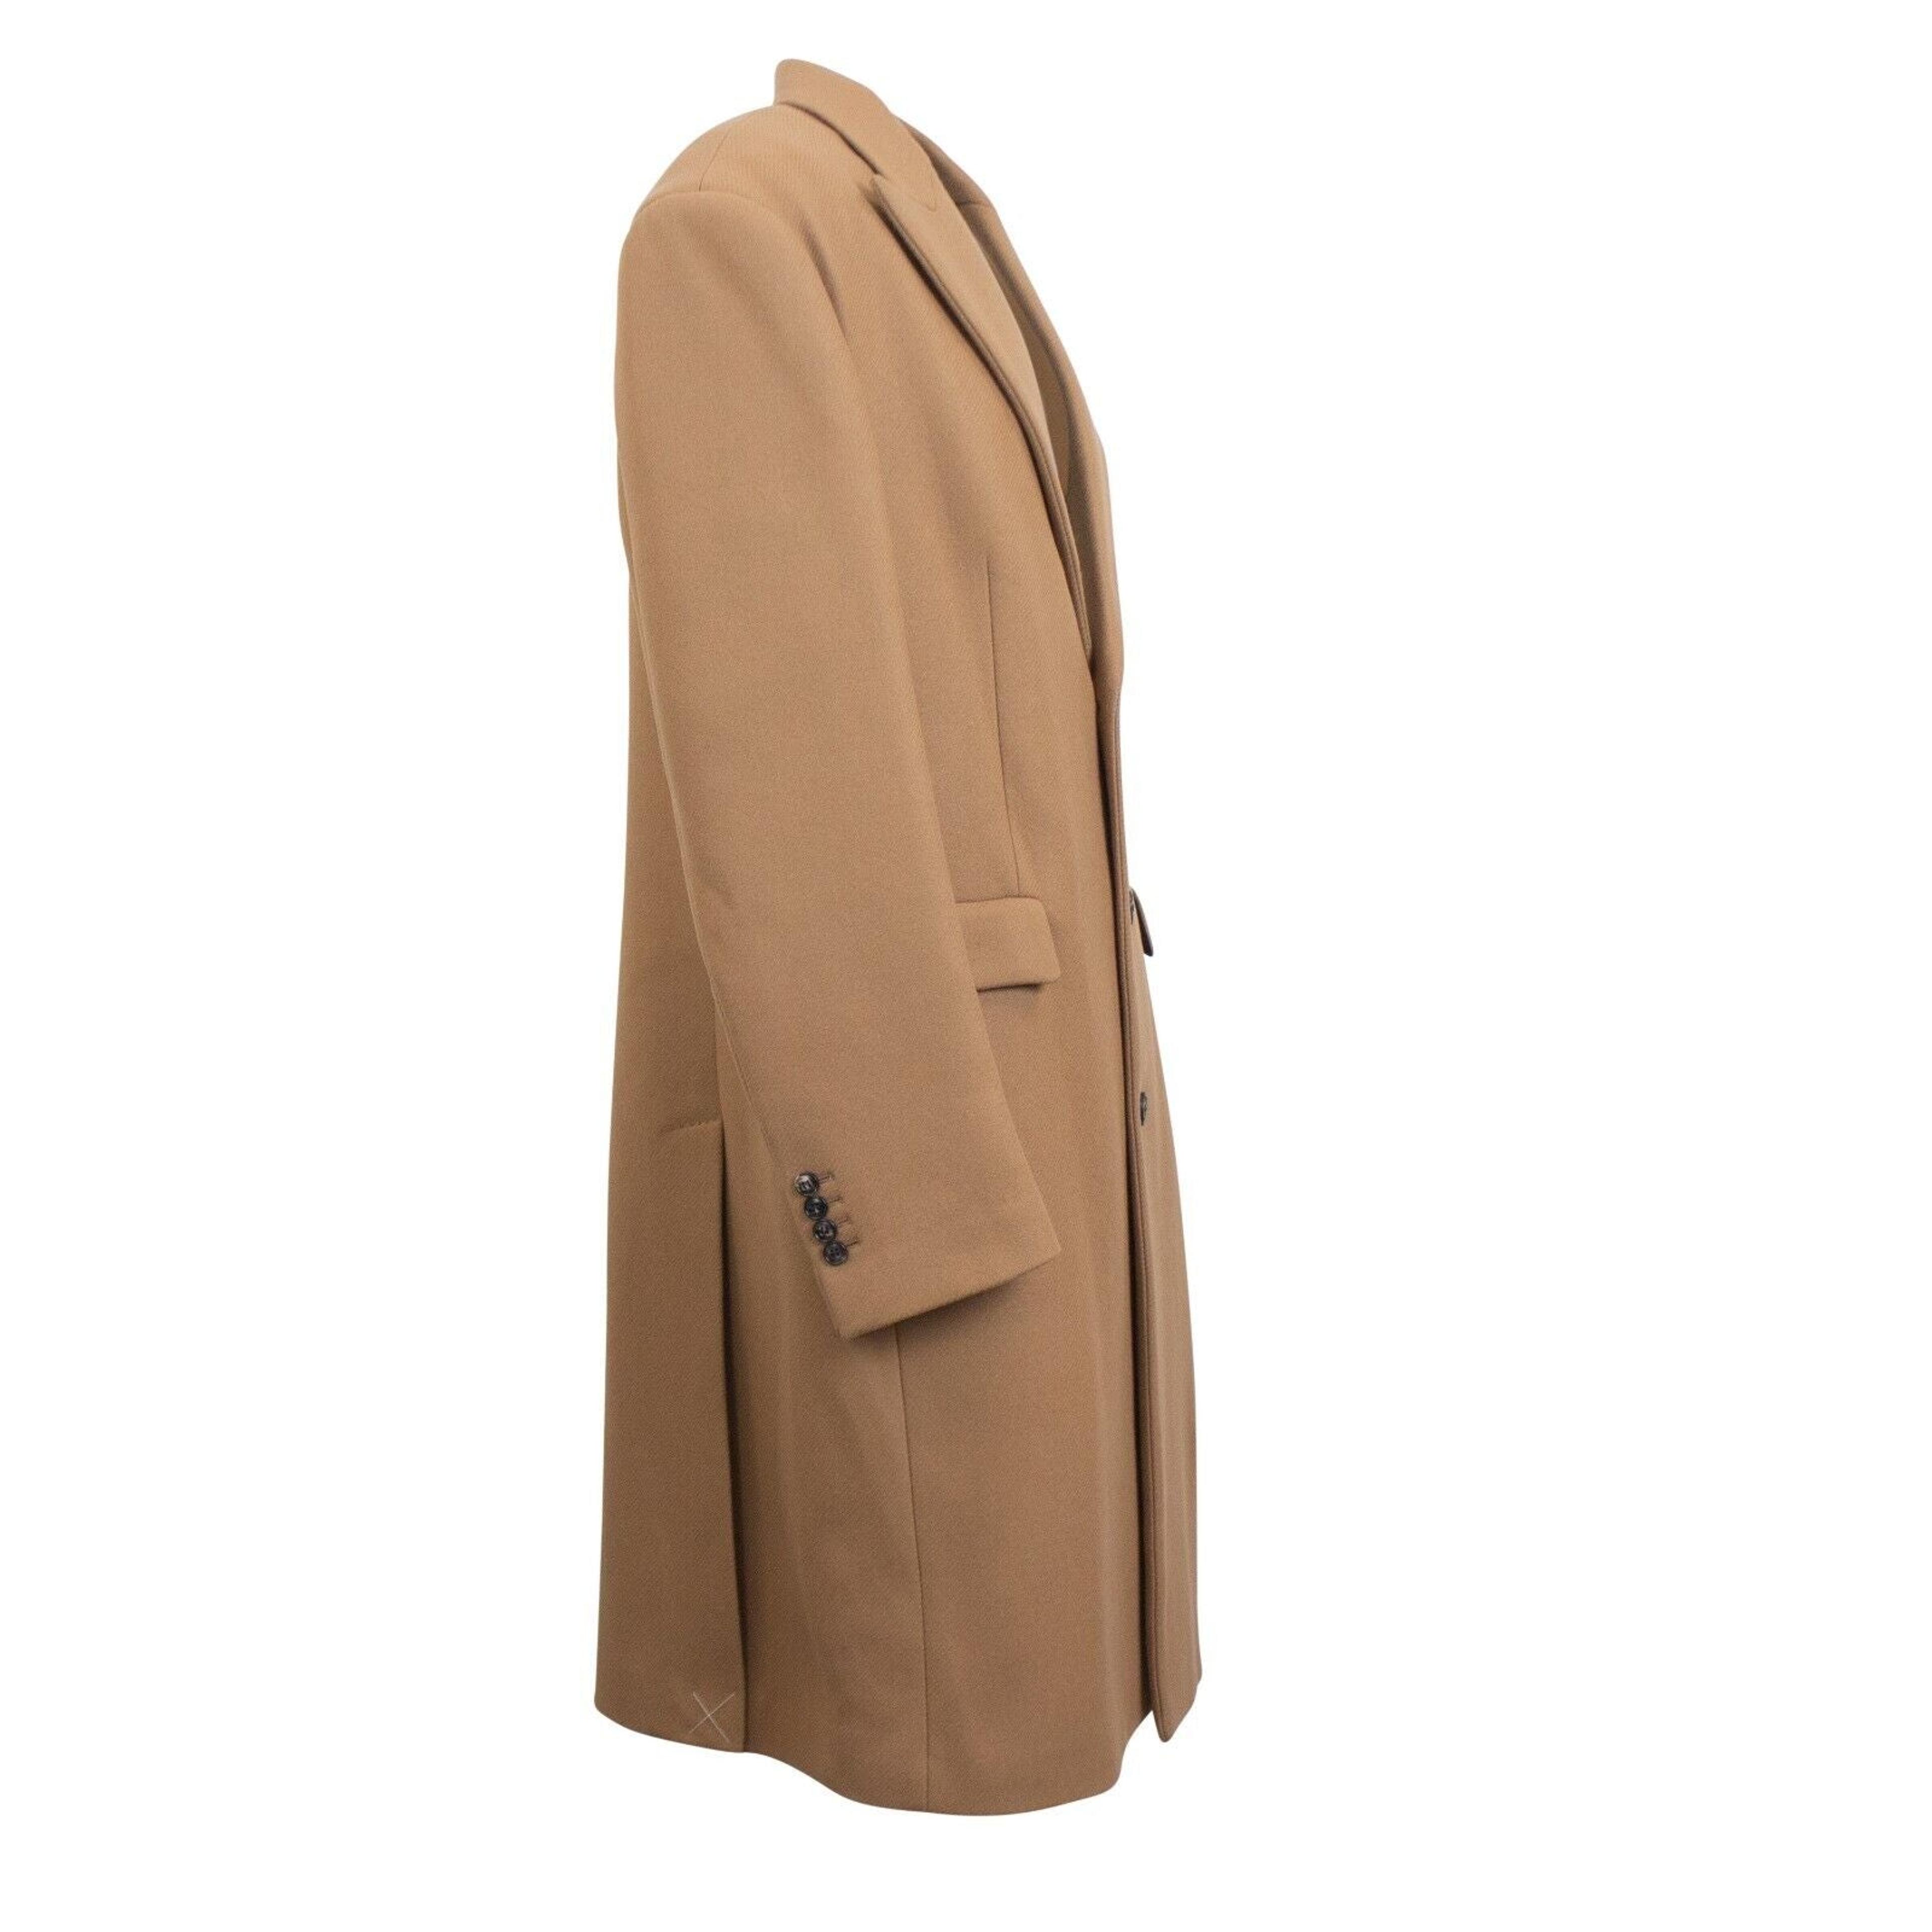 Alternate View 3 of Brown Single Breasted Lapel Coat